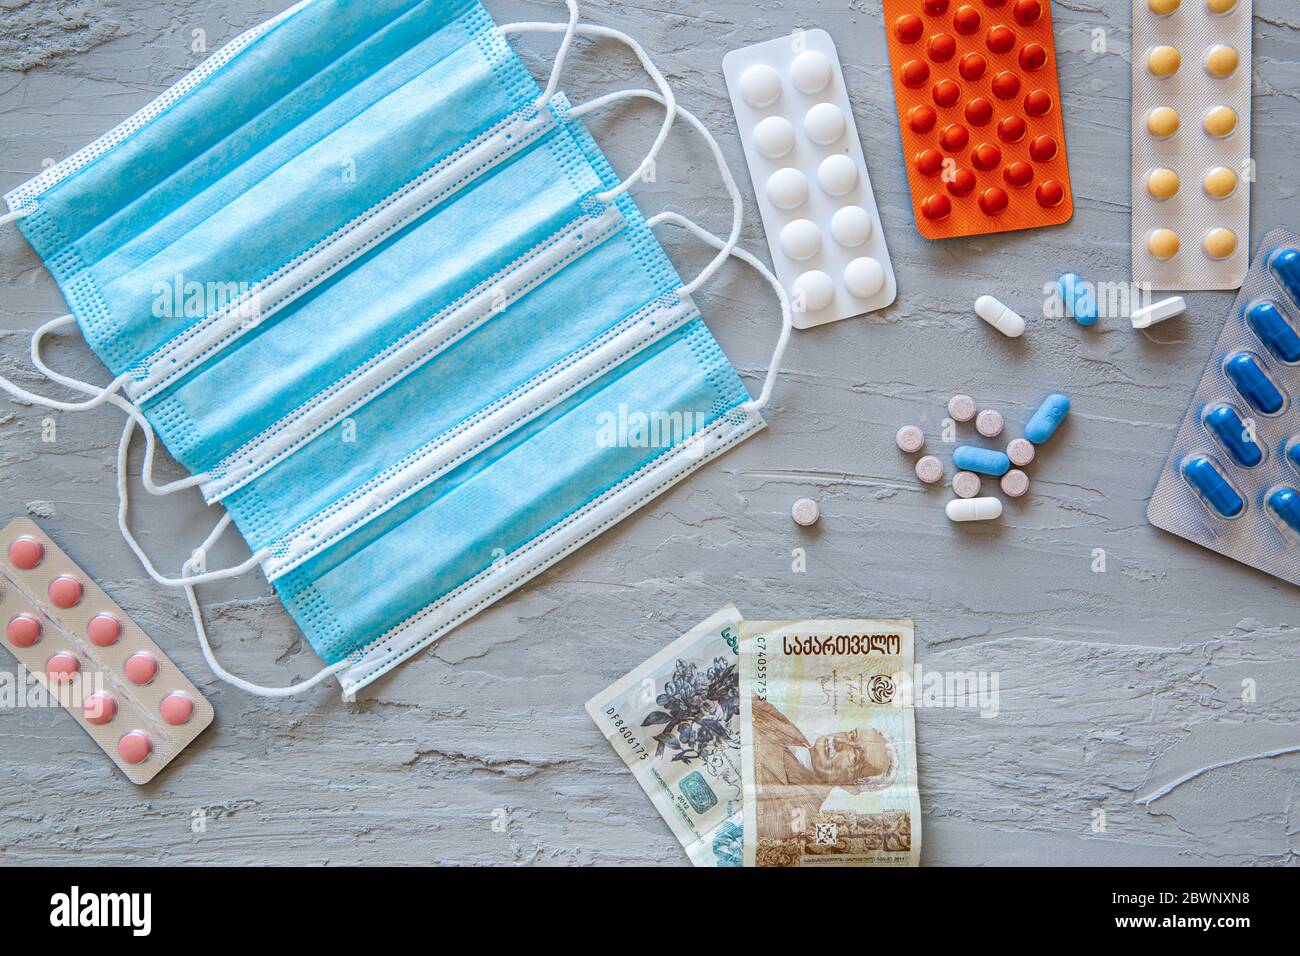 Medical and health costs during coronavirus crisis. Epidemic covid-19 concept in Georgia. Georgian banknotes, masks and pills. Stock Photo